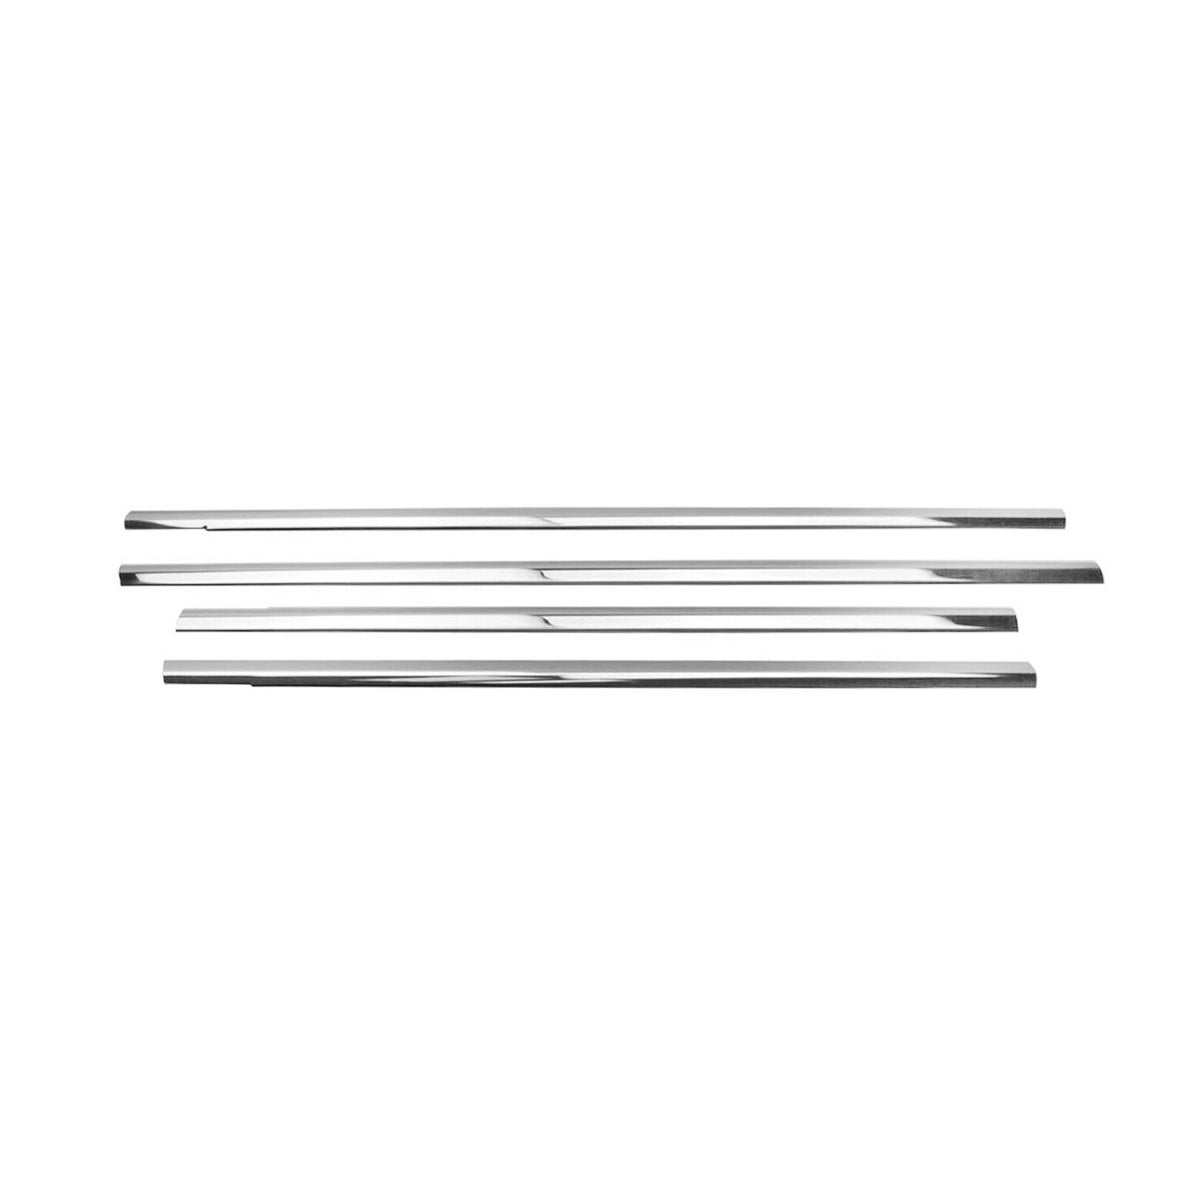 Window strips decorative strips for Ford Focus C-Max 2003-2010 stainless steel chrome 4 pieces